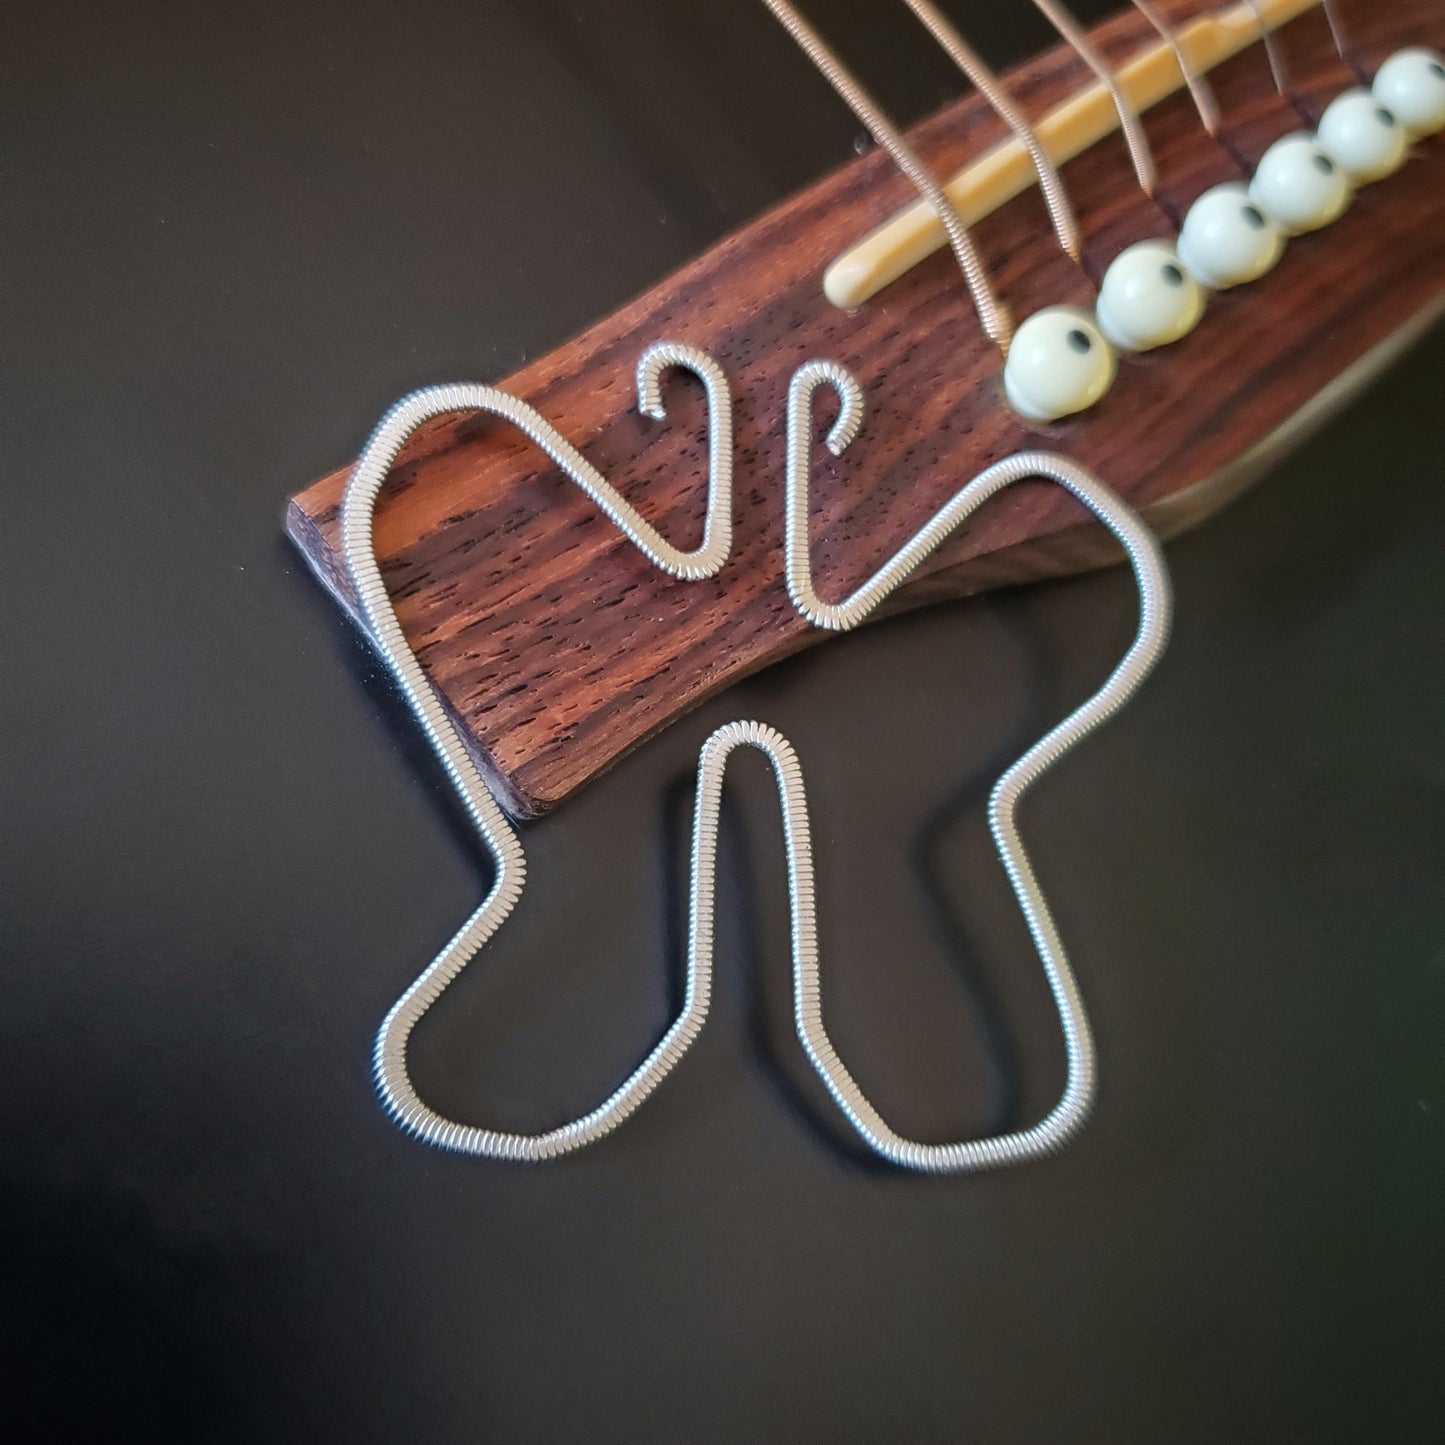 a bookmark made from an upcycled guitar string which was hammered flat and shaped into a butterfly - bookmark sits on the bridge of a black guitar